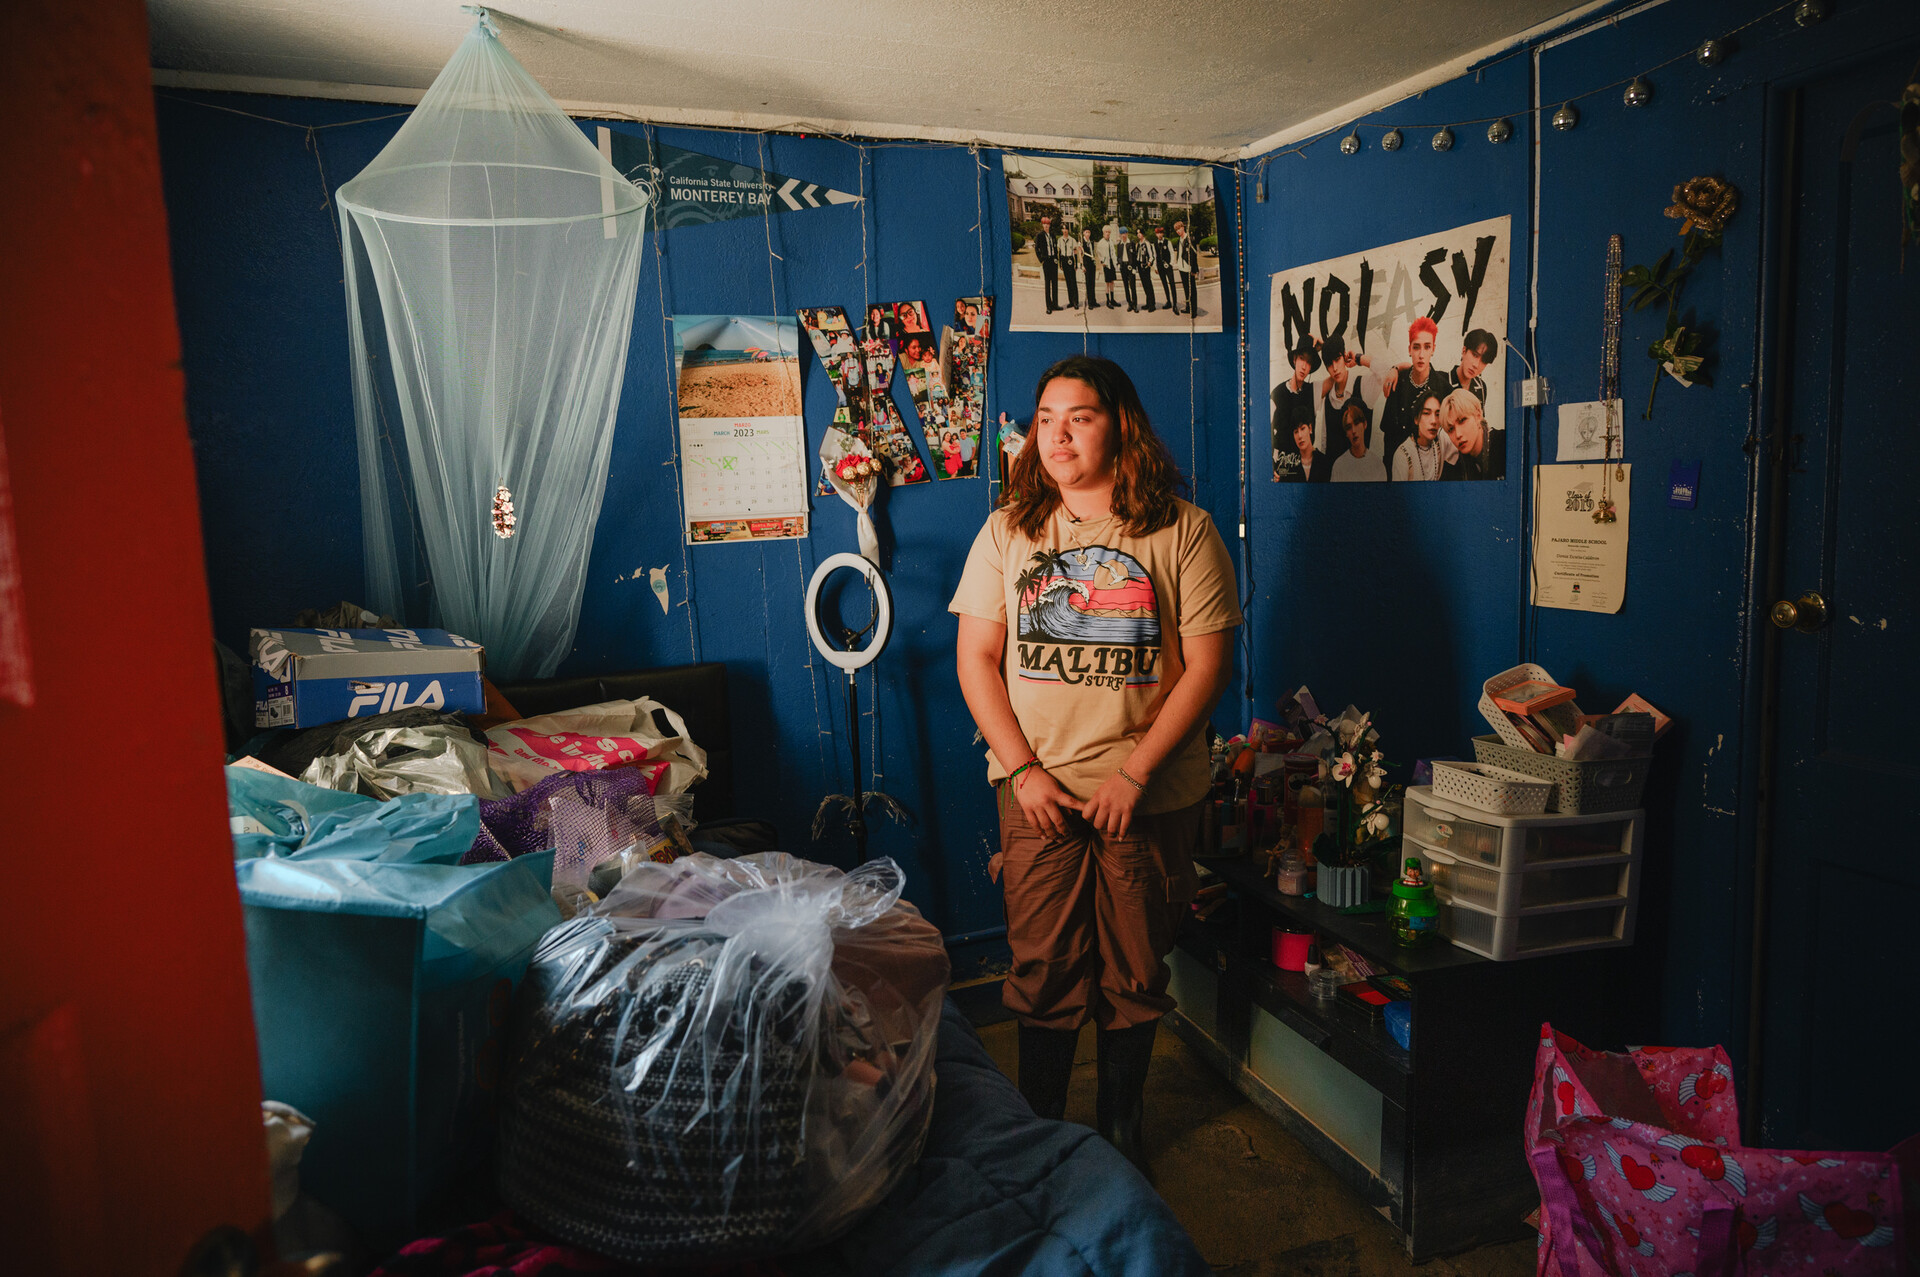 A young person in rubber boots stands in a small bedroom with posters on the blue-painted wall and mud on the floor.